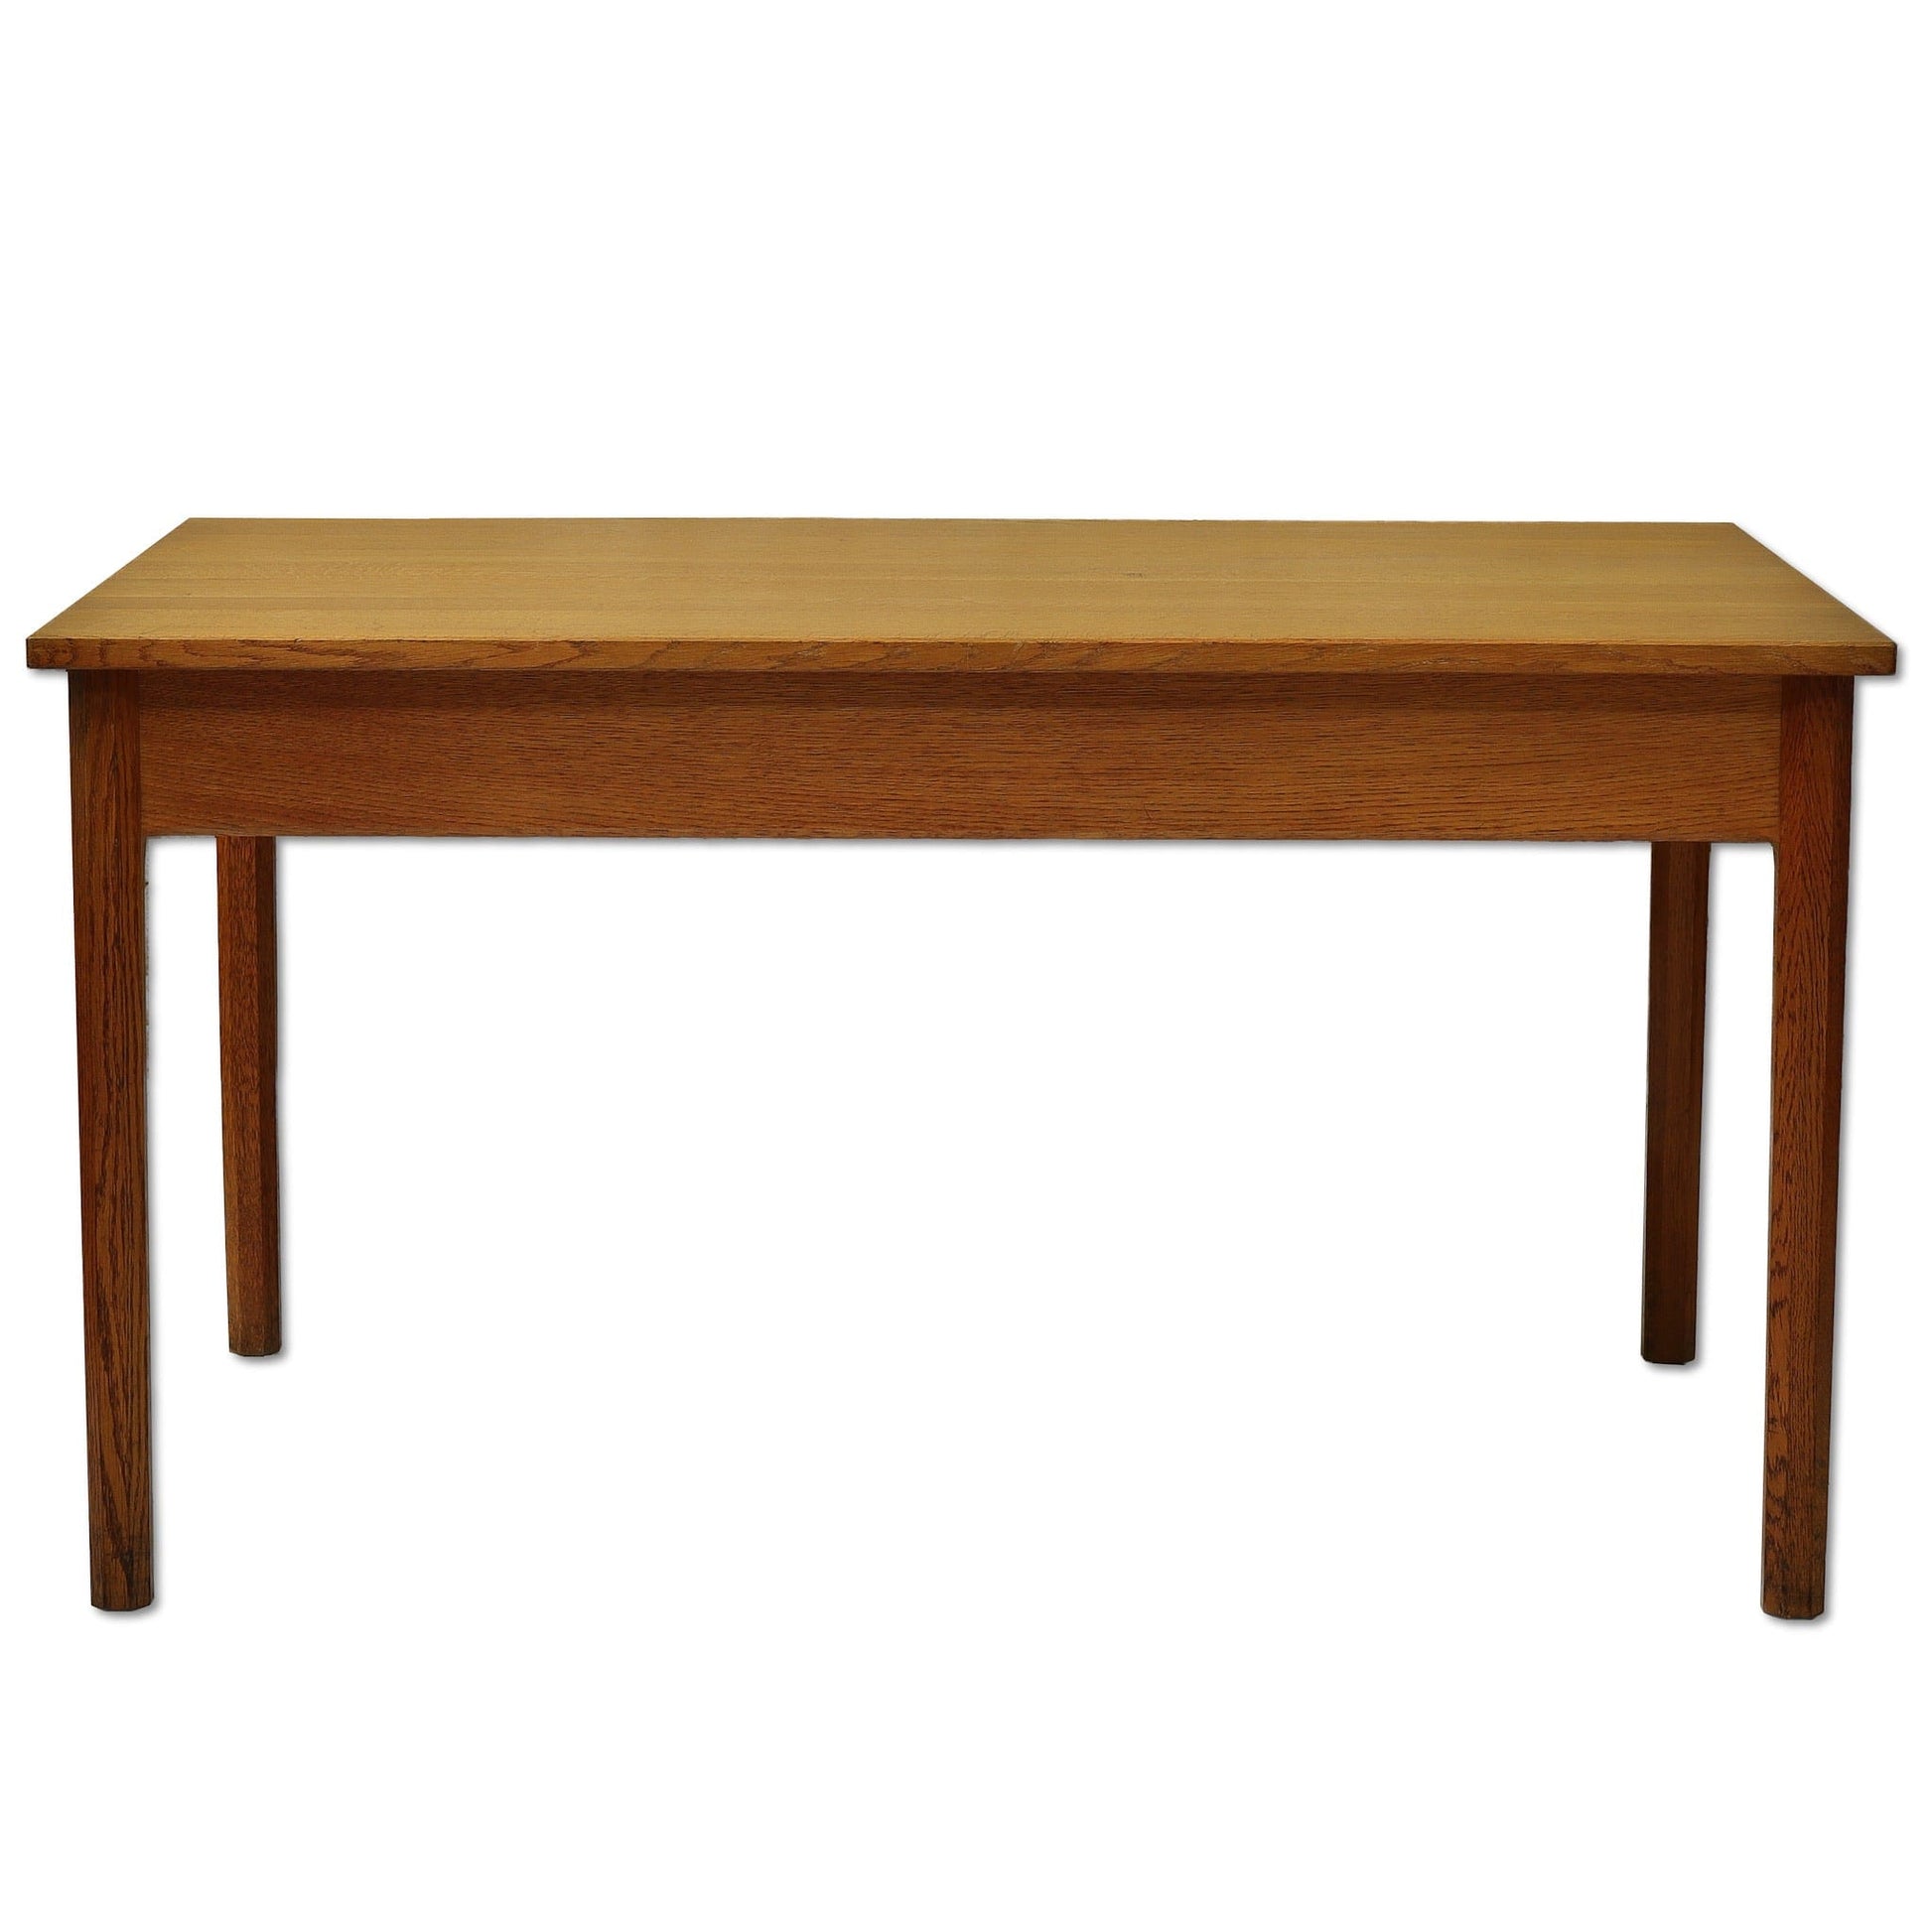 Gordon Russell Arts & Crafts Cotswold School English Oak Dining Table 1961